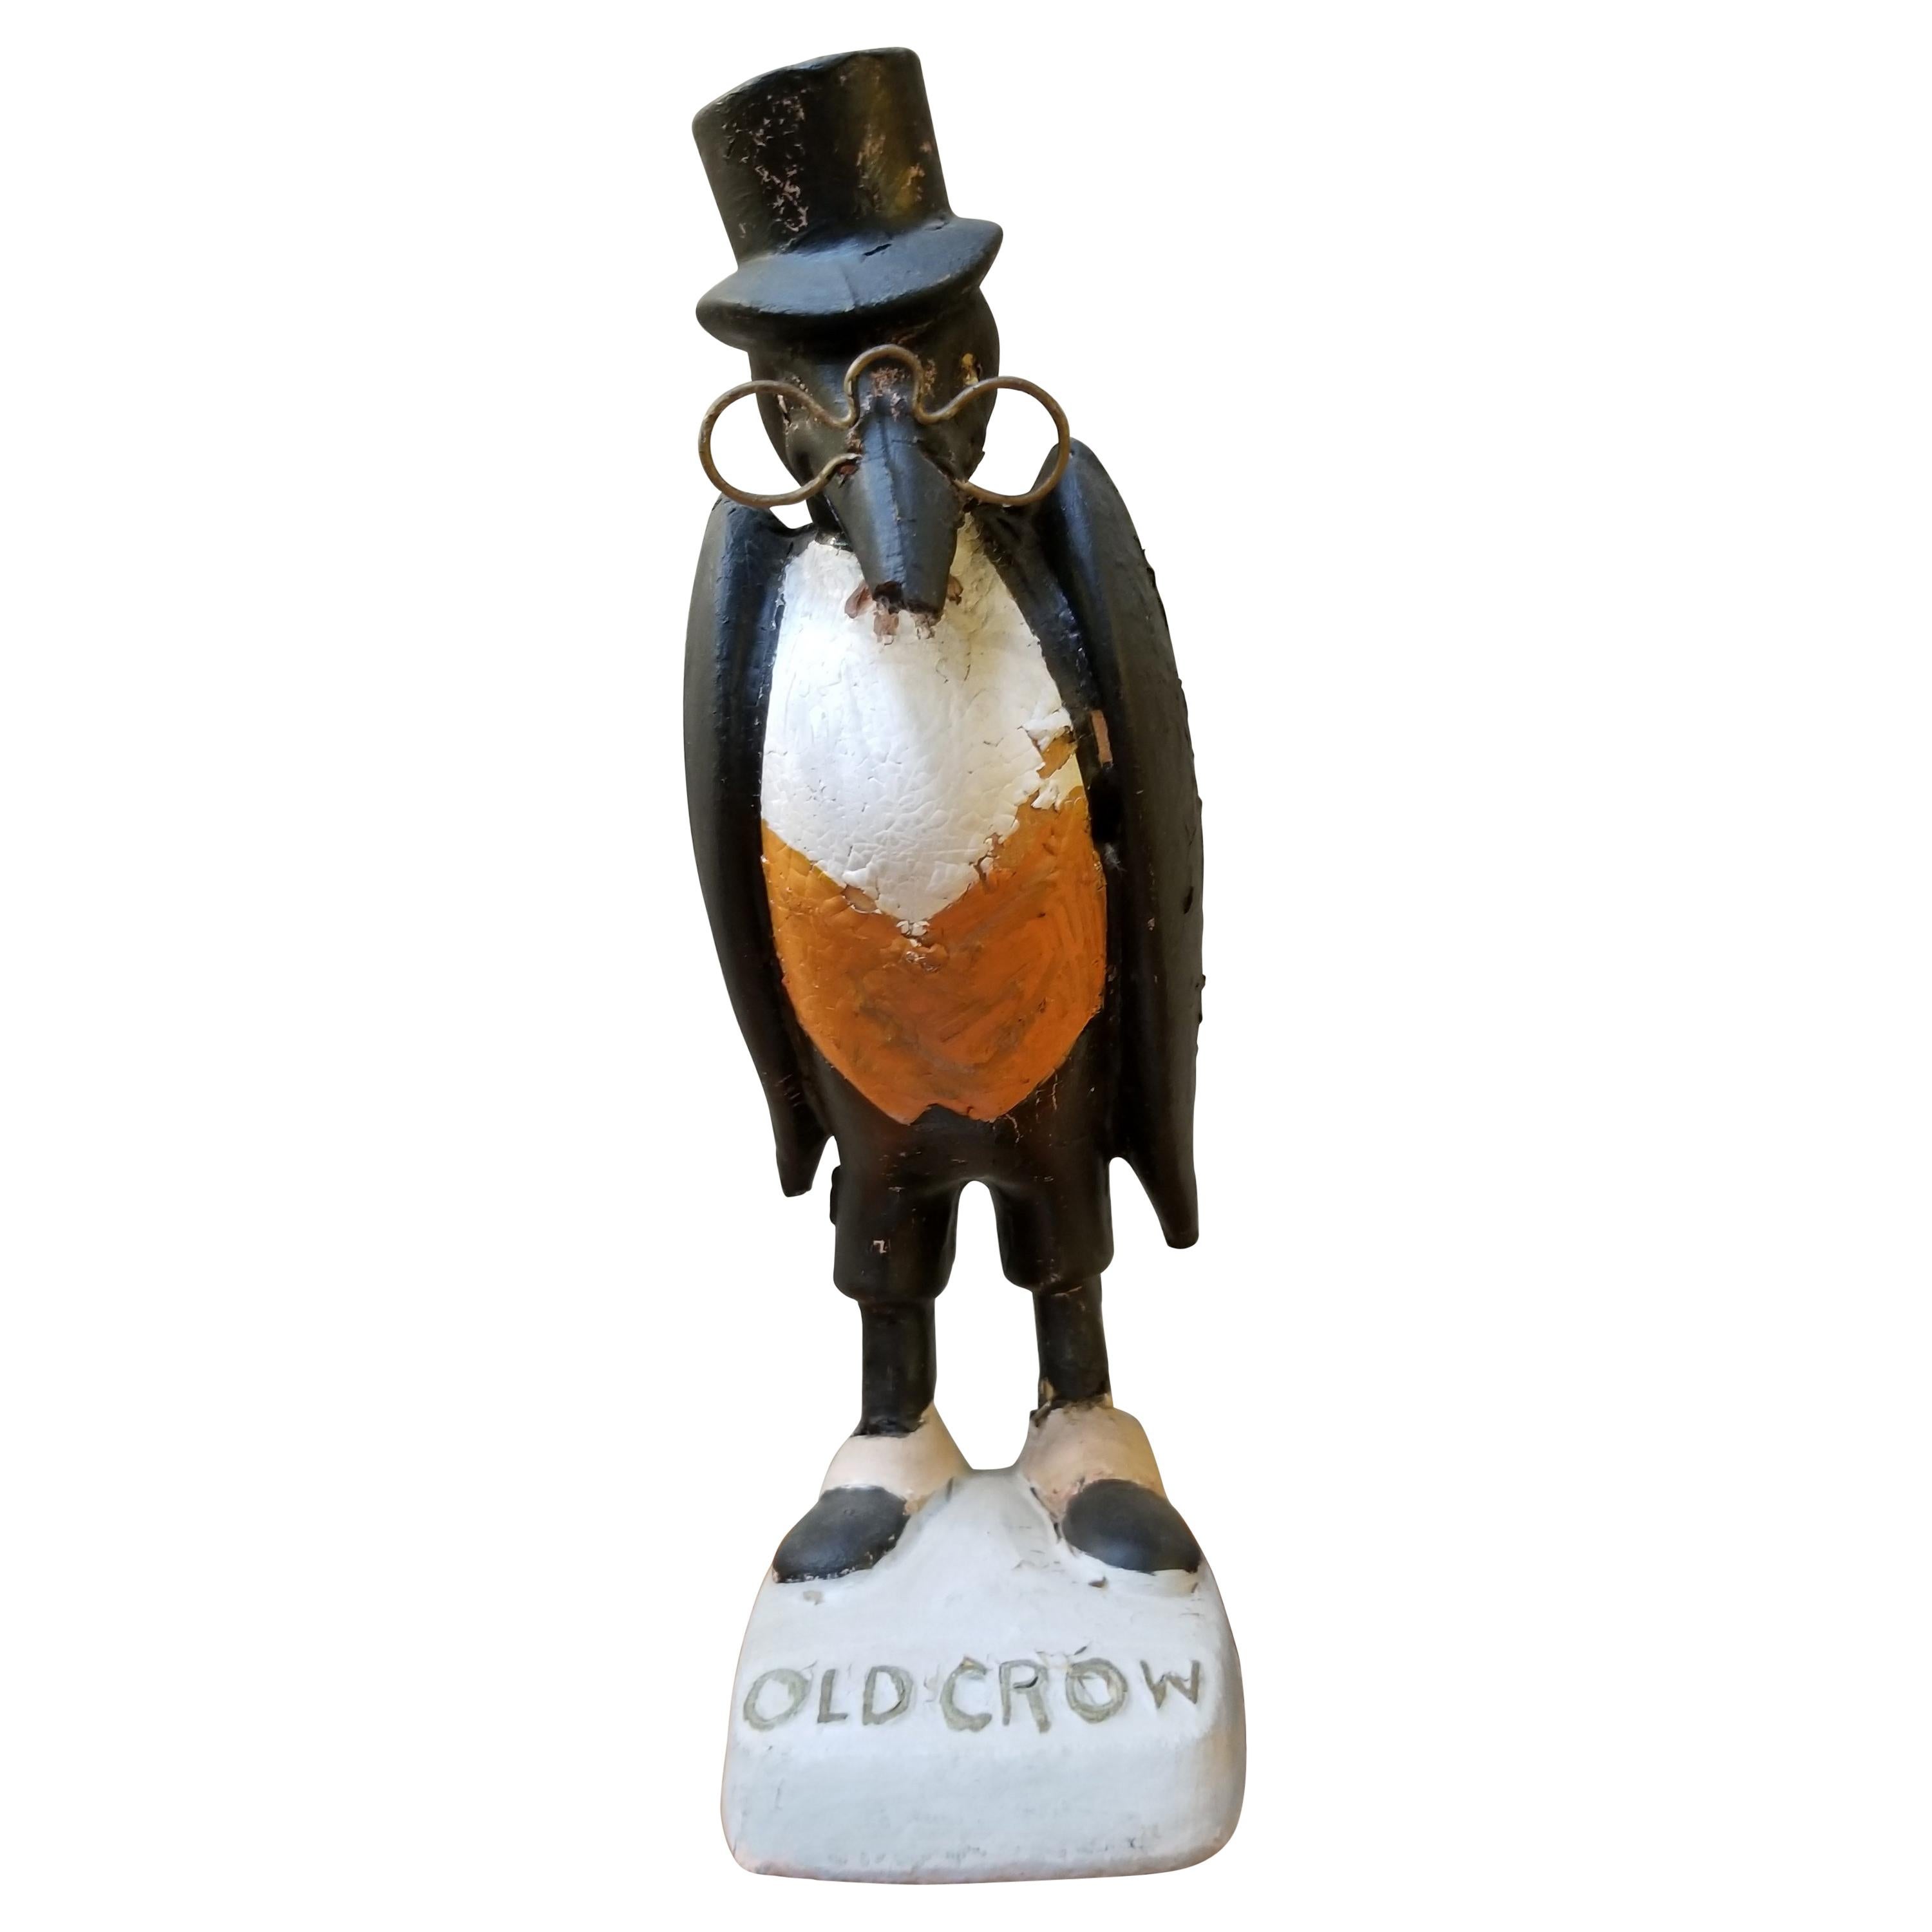 Old Crow Whiskey Advertising Figure For Sale